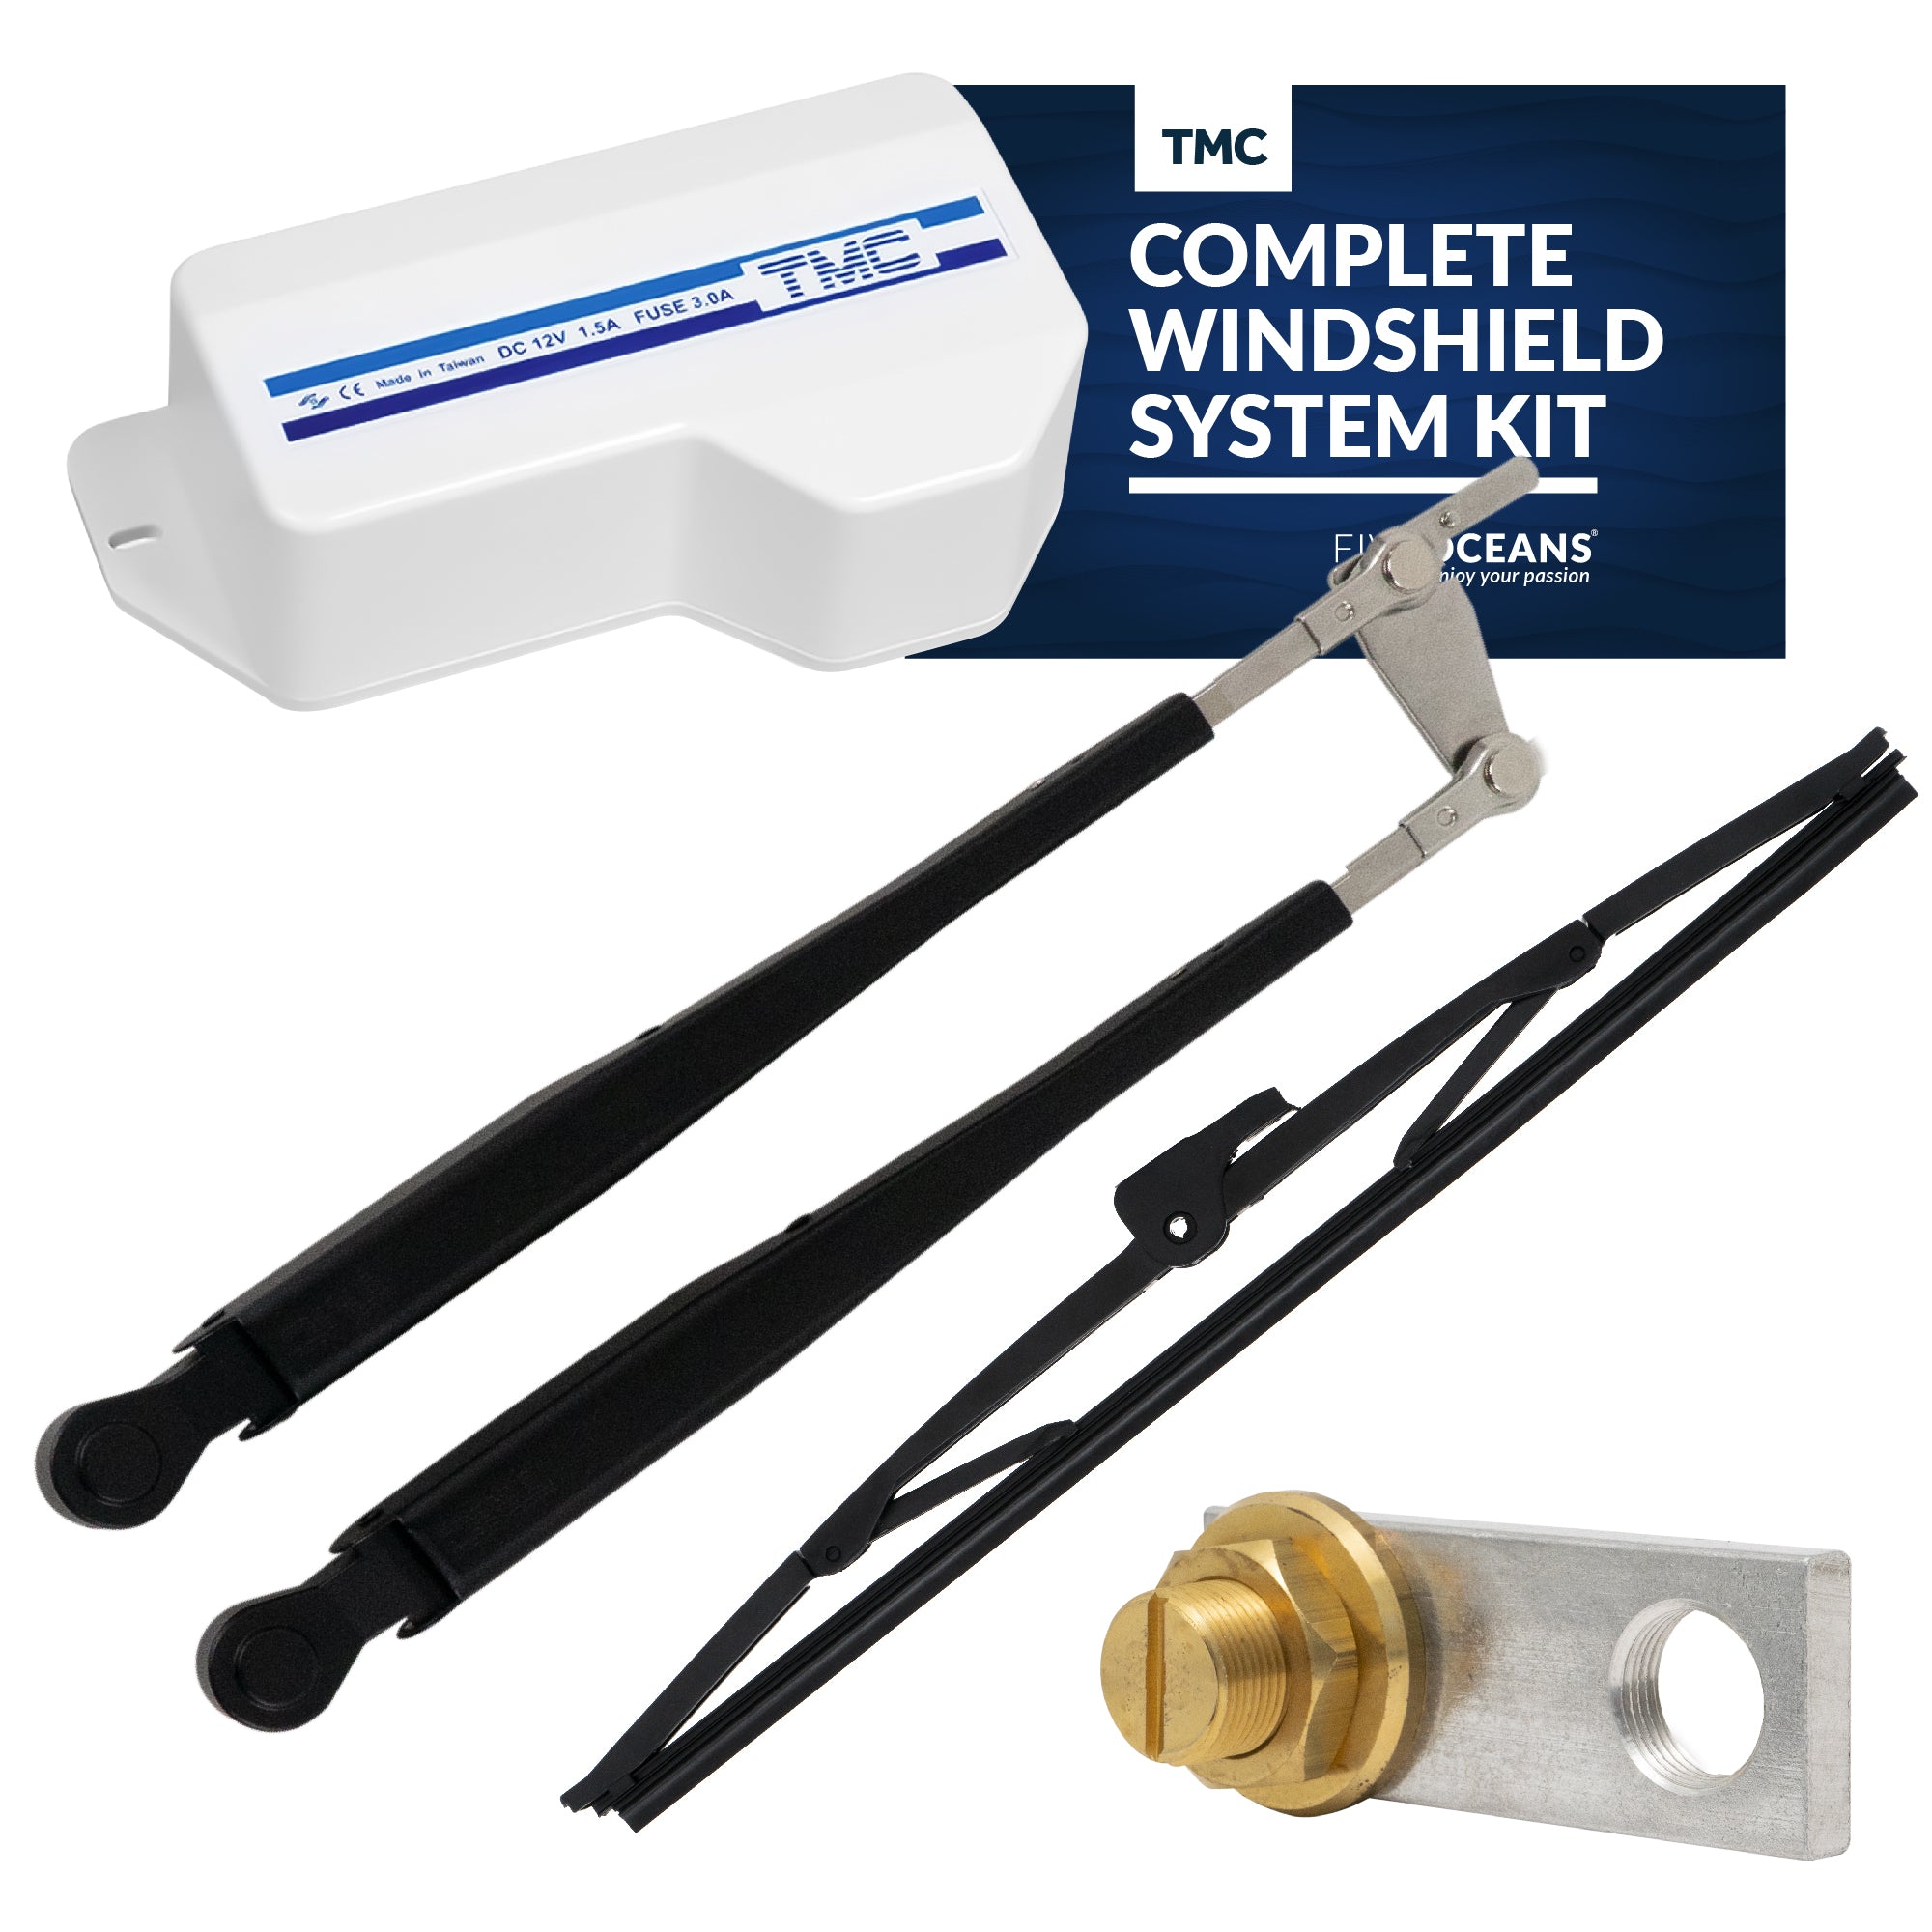 TMC Complete Windshield System Kit  - FO746-C6